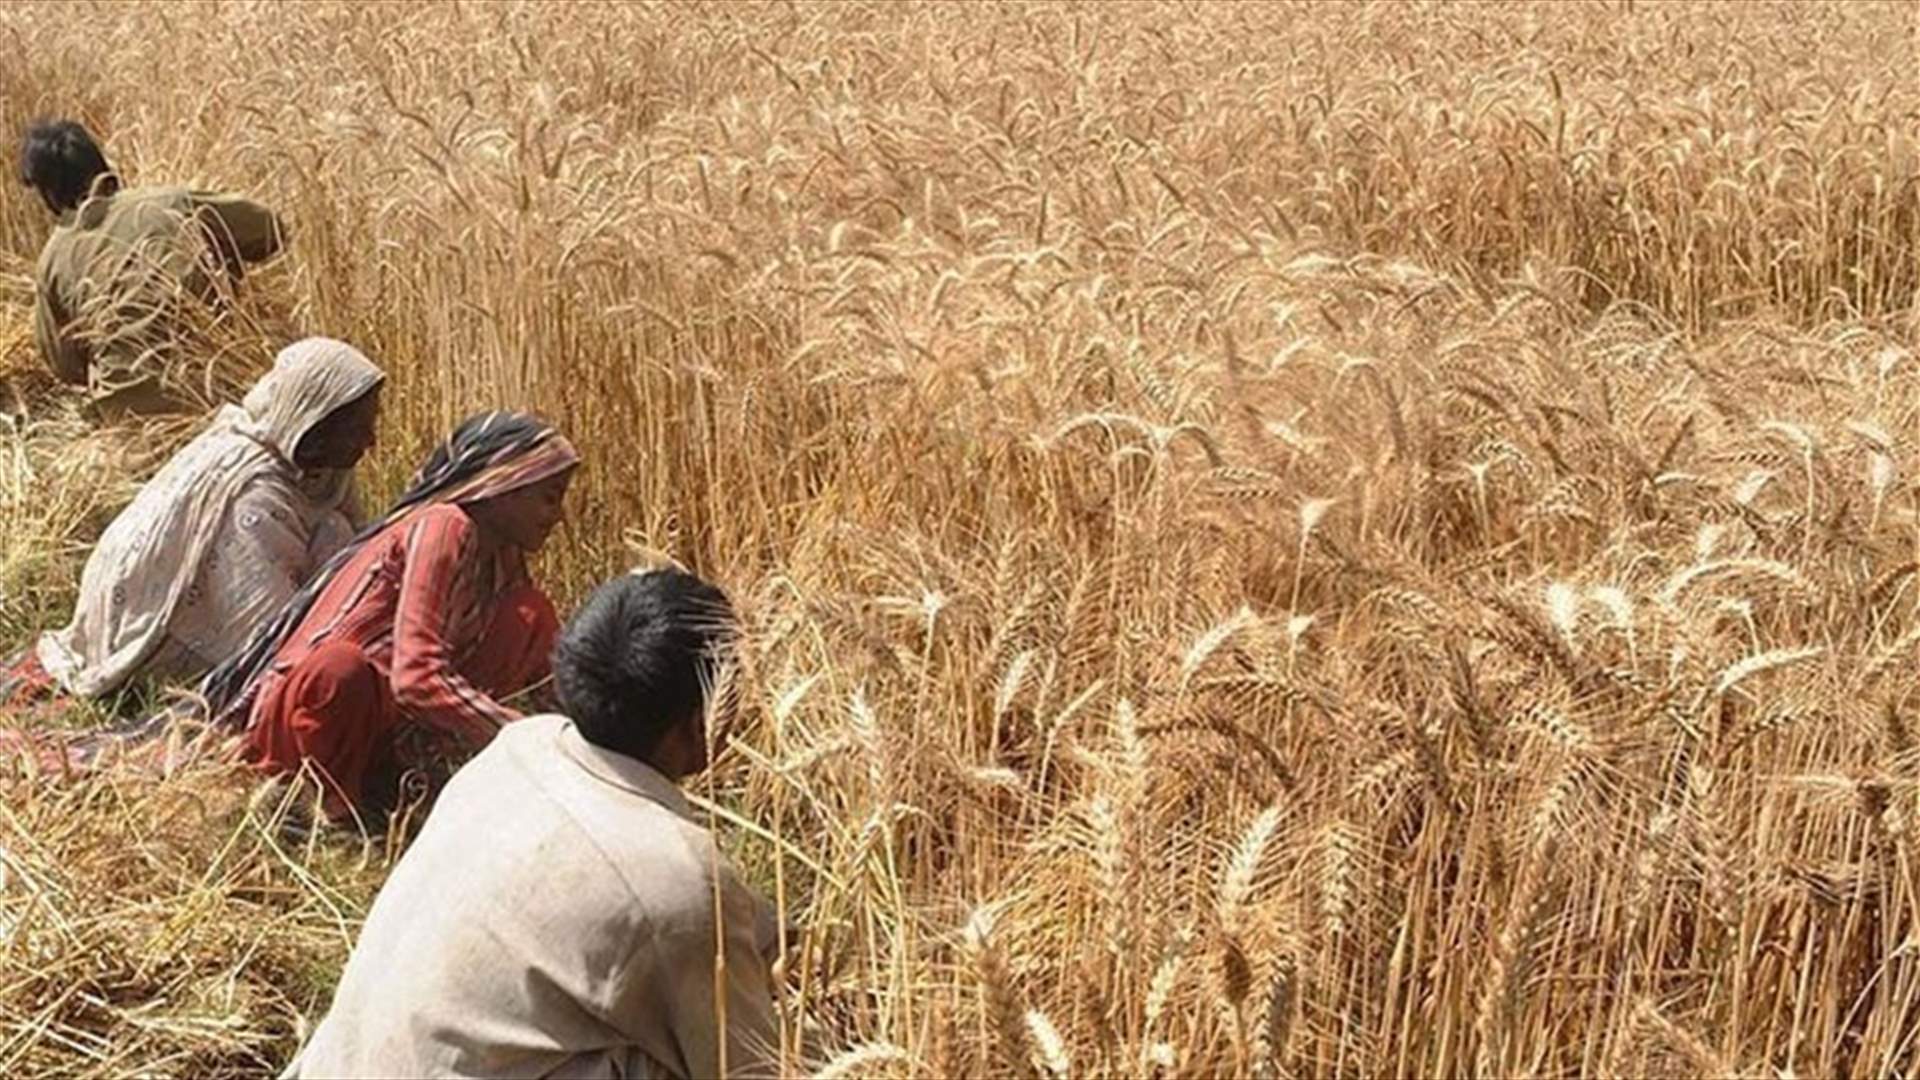 Battered by war, Syria&#39;s wheat crop halved this year to new low